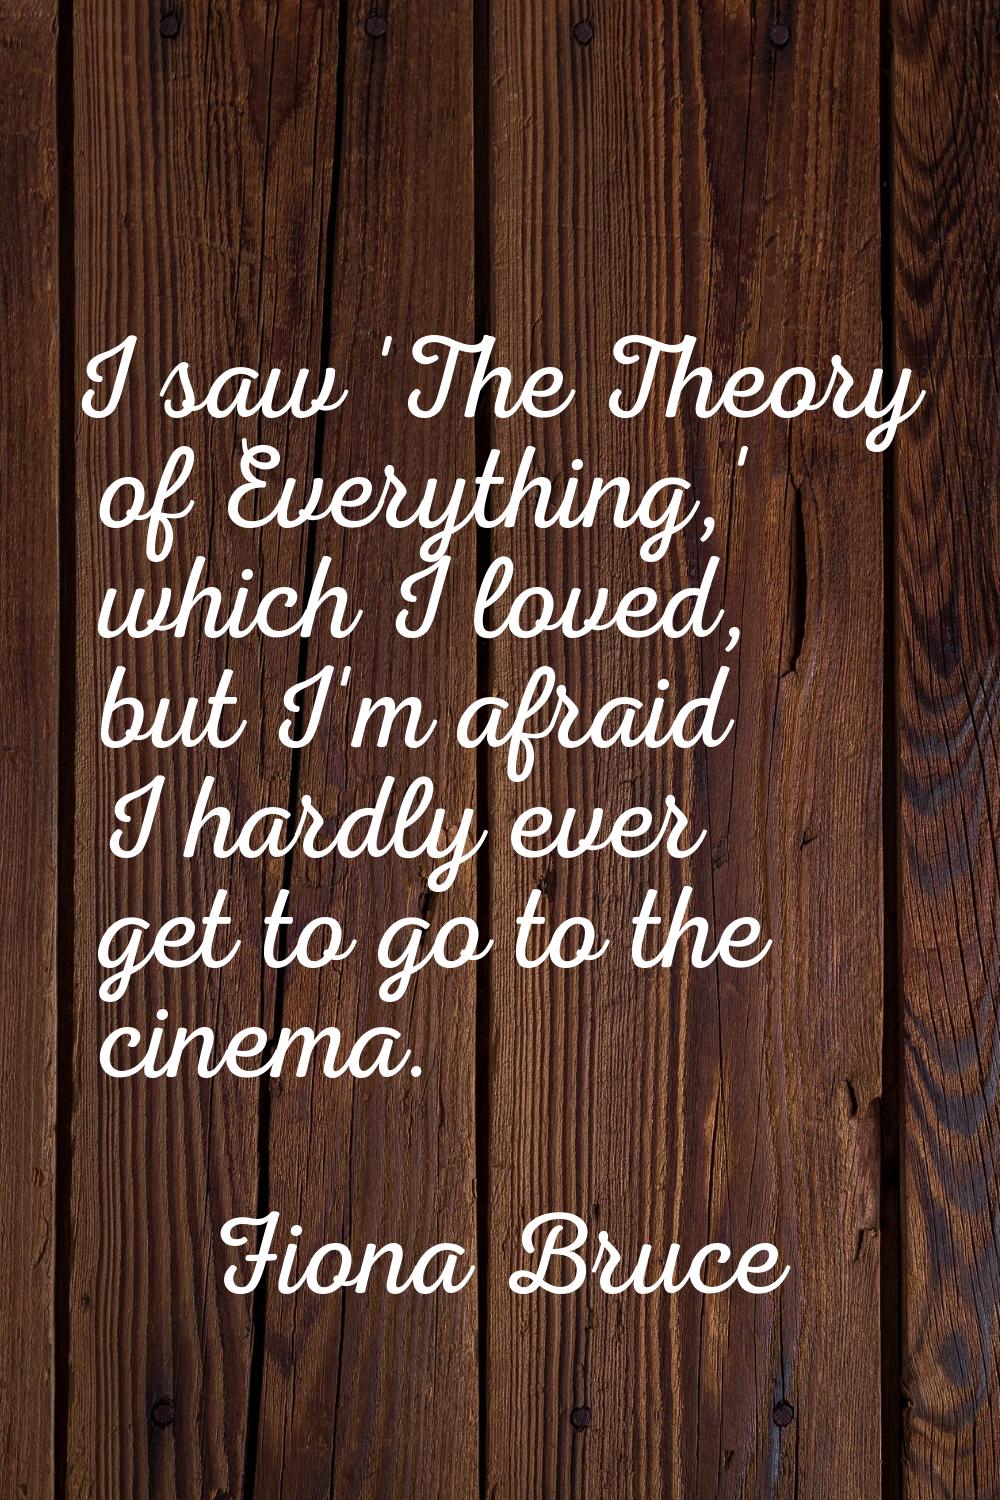 I saw 'The Theory of Everything,' which I loved, but I'm afraid I hardly ever get to go to the cine